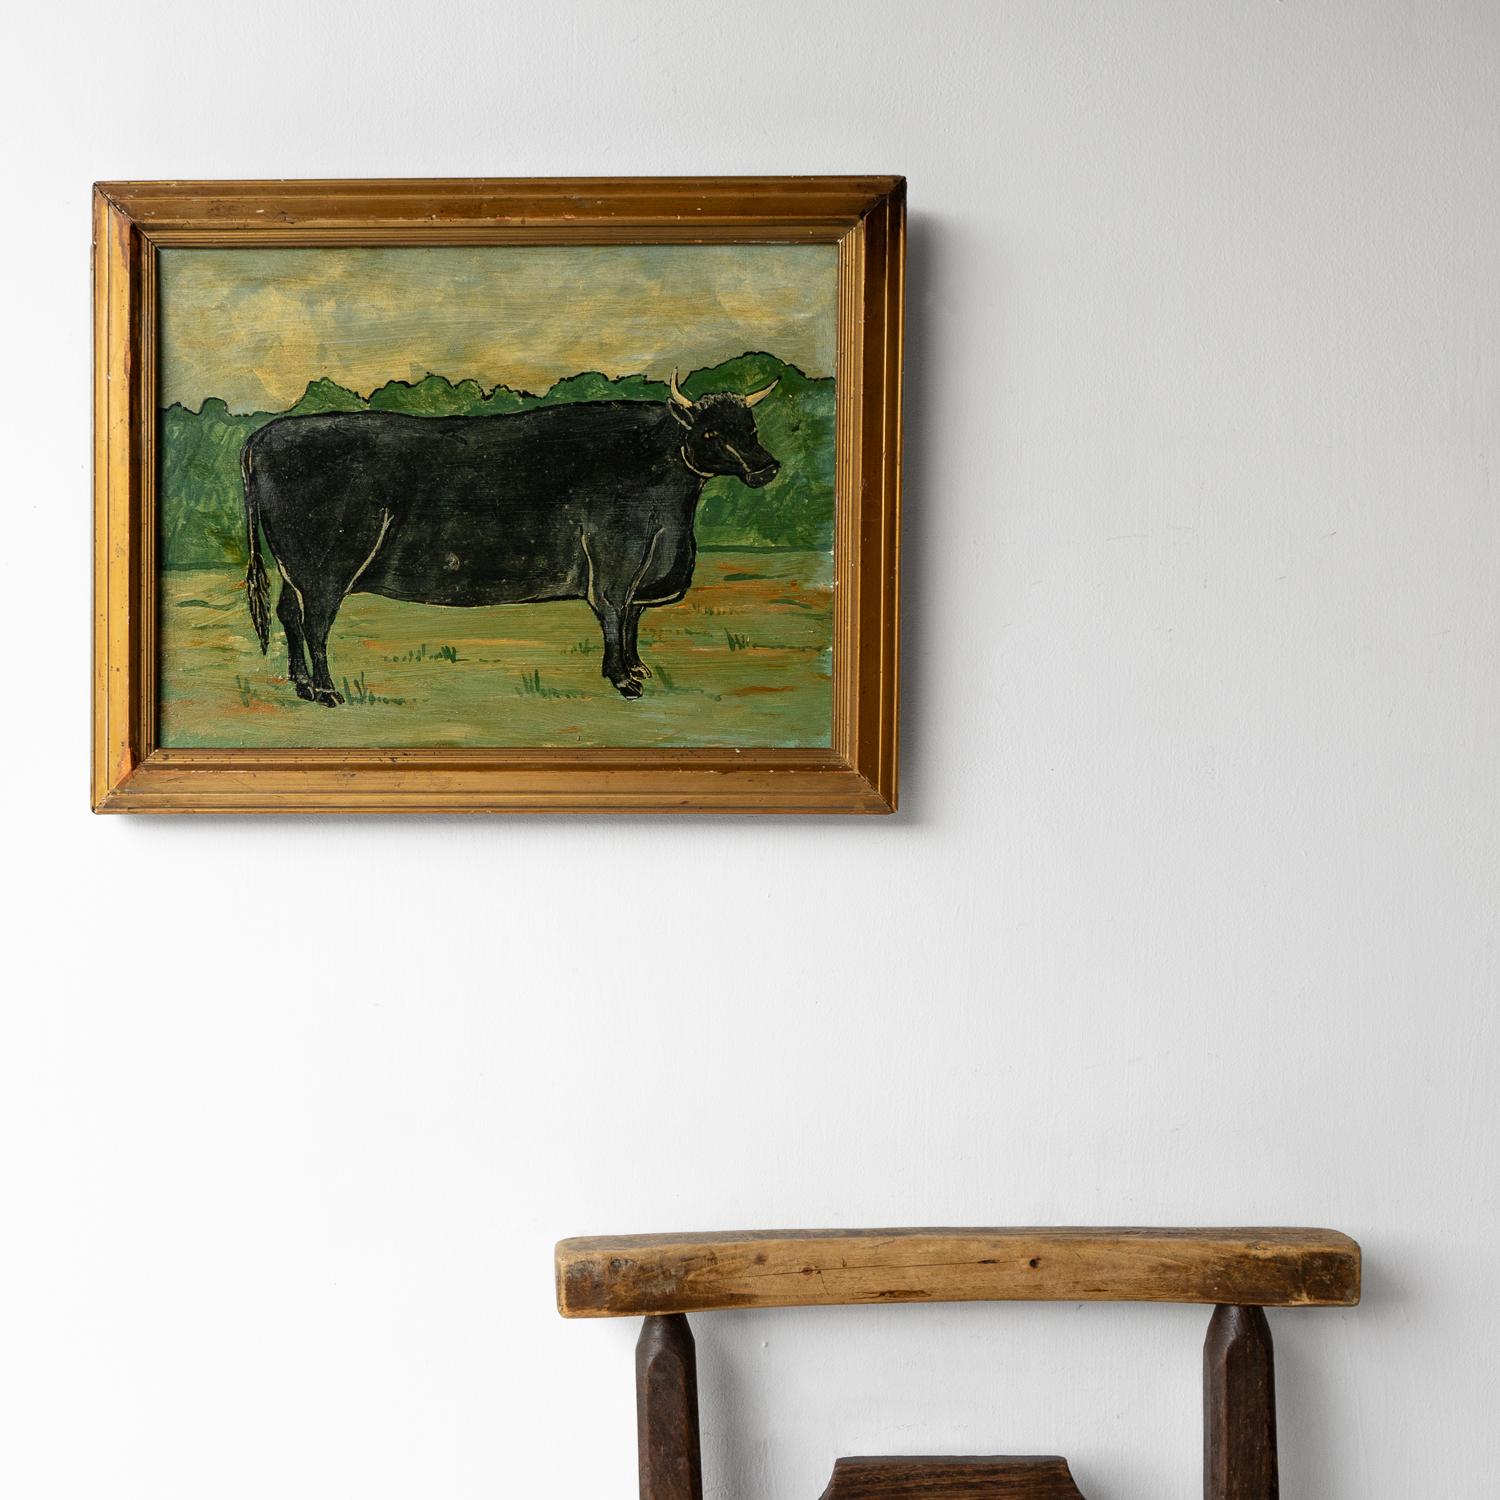 Hand-Painted Naive Folk Art Portrait Of A Cow, Vintage Original Oil On Board Painting